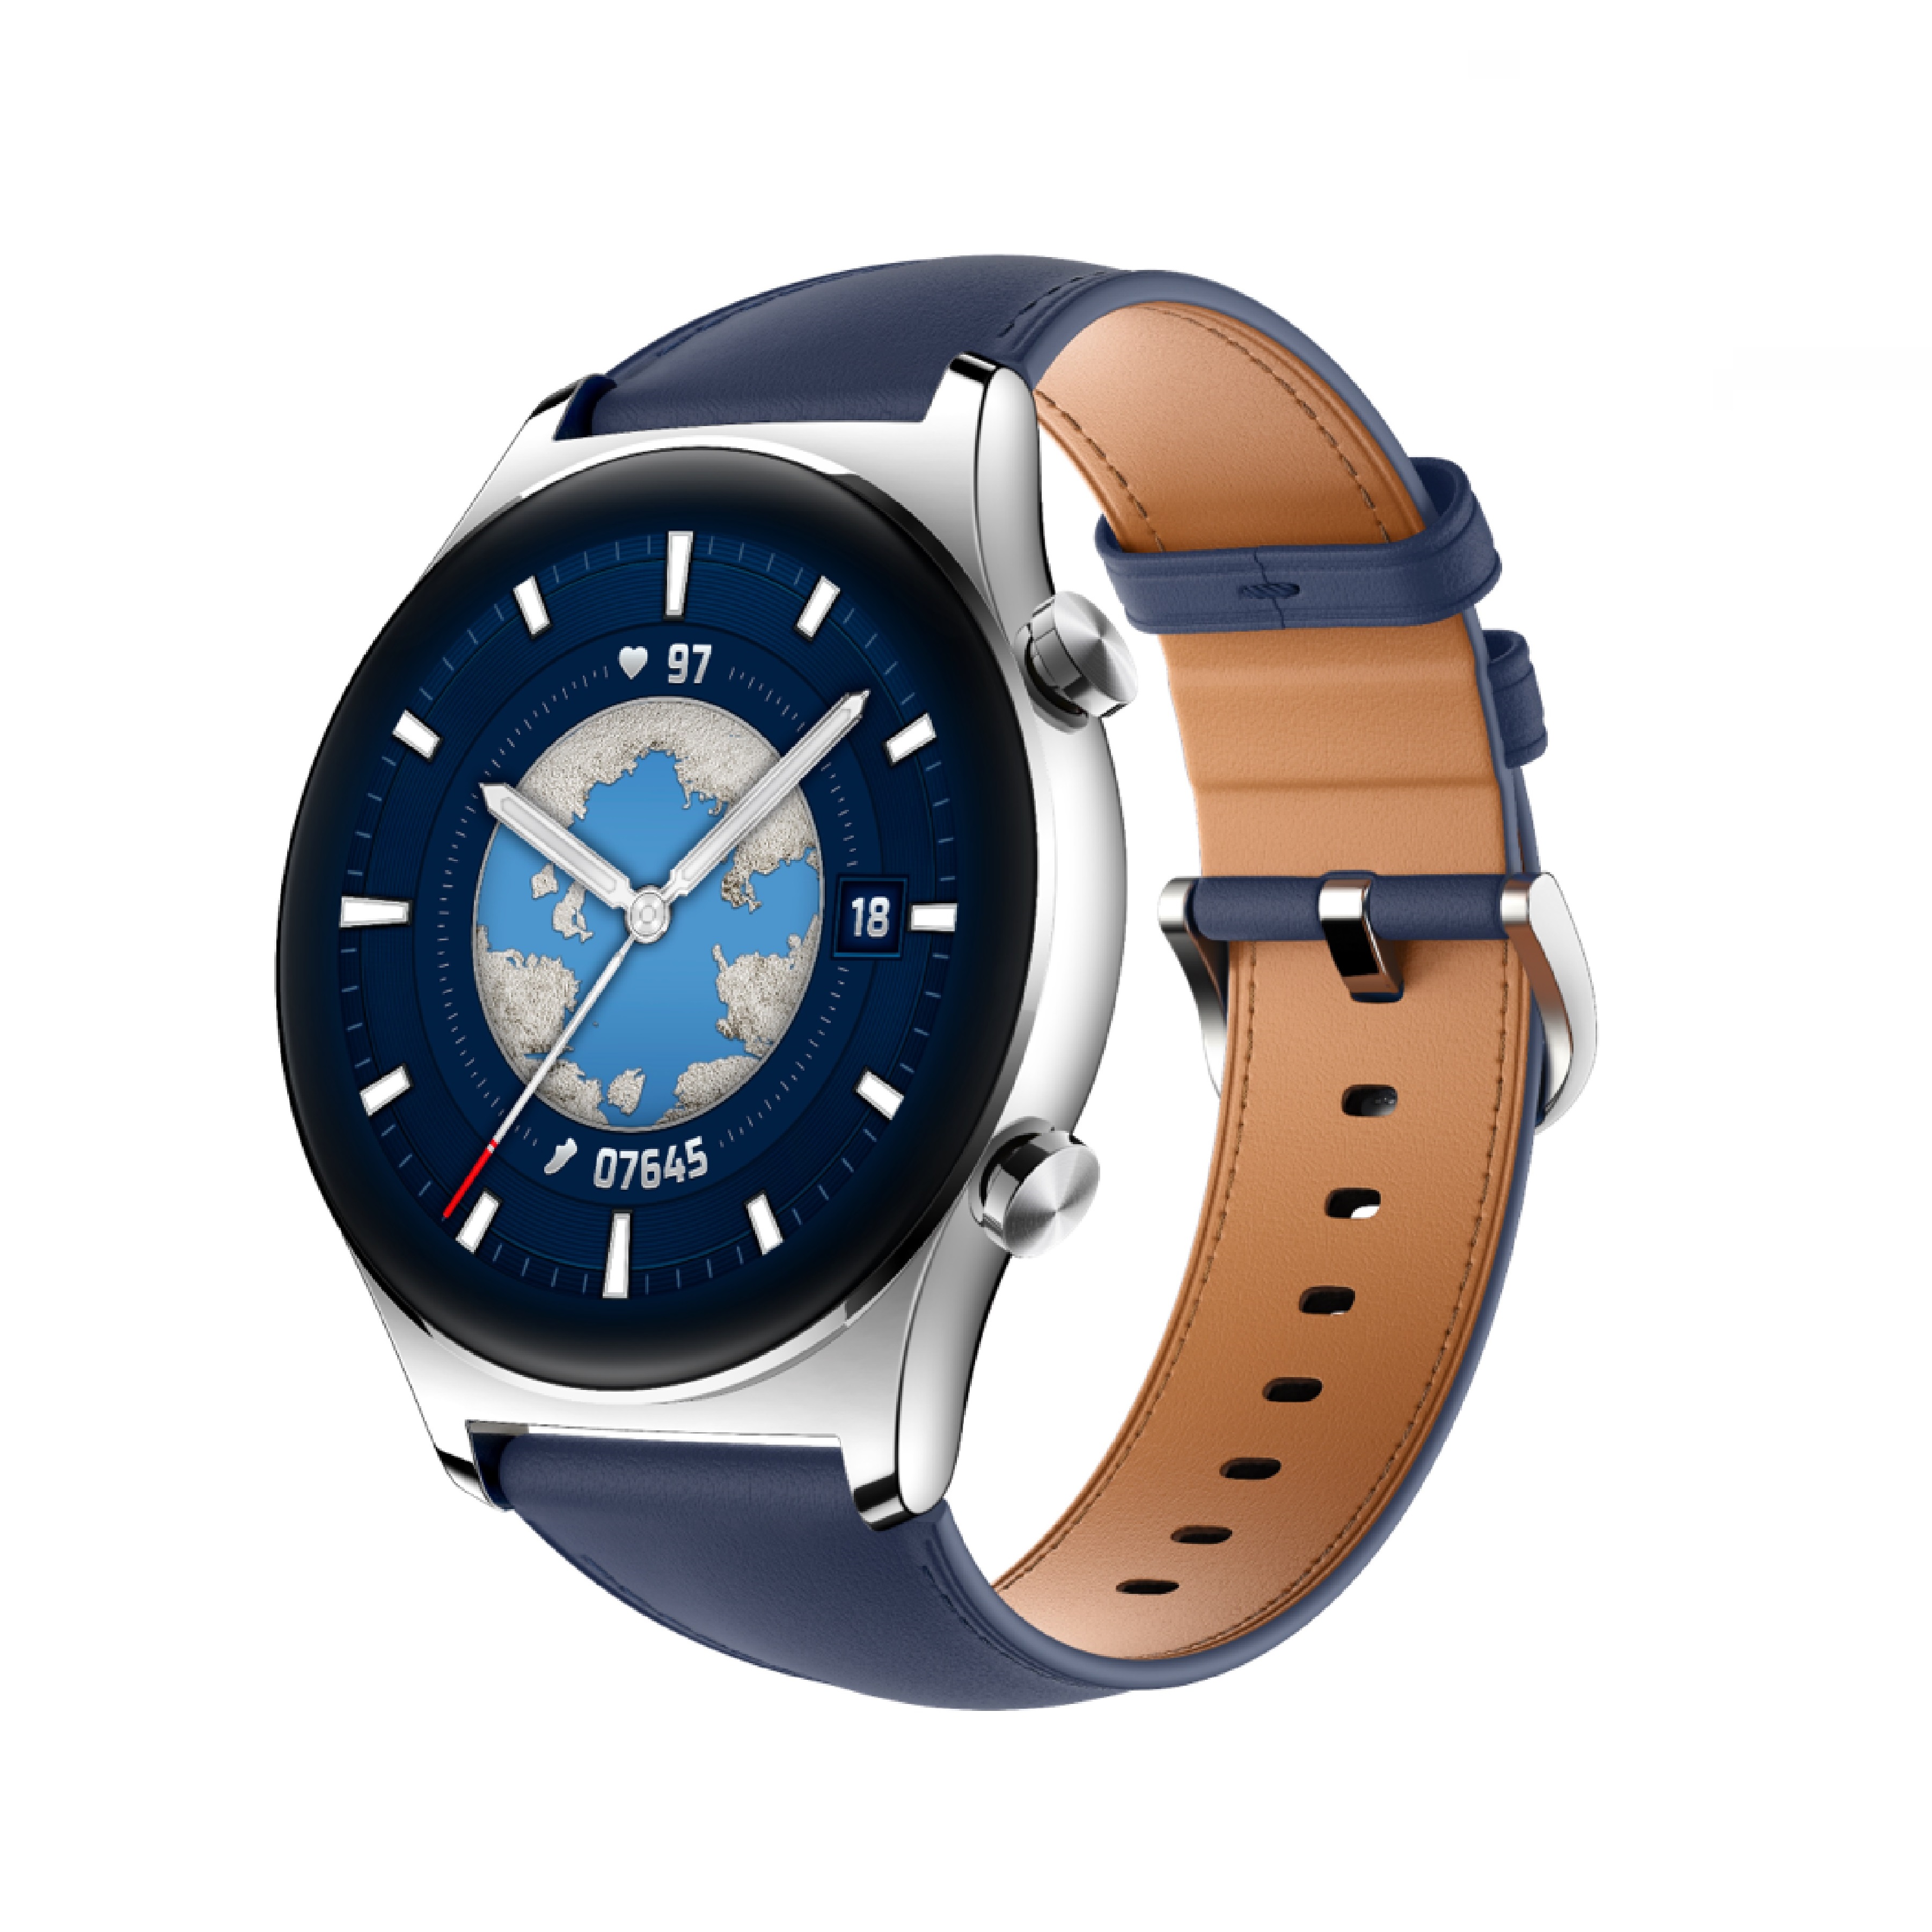 HONOR Watch GS 3 (Leather Strap), , large image number 0